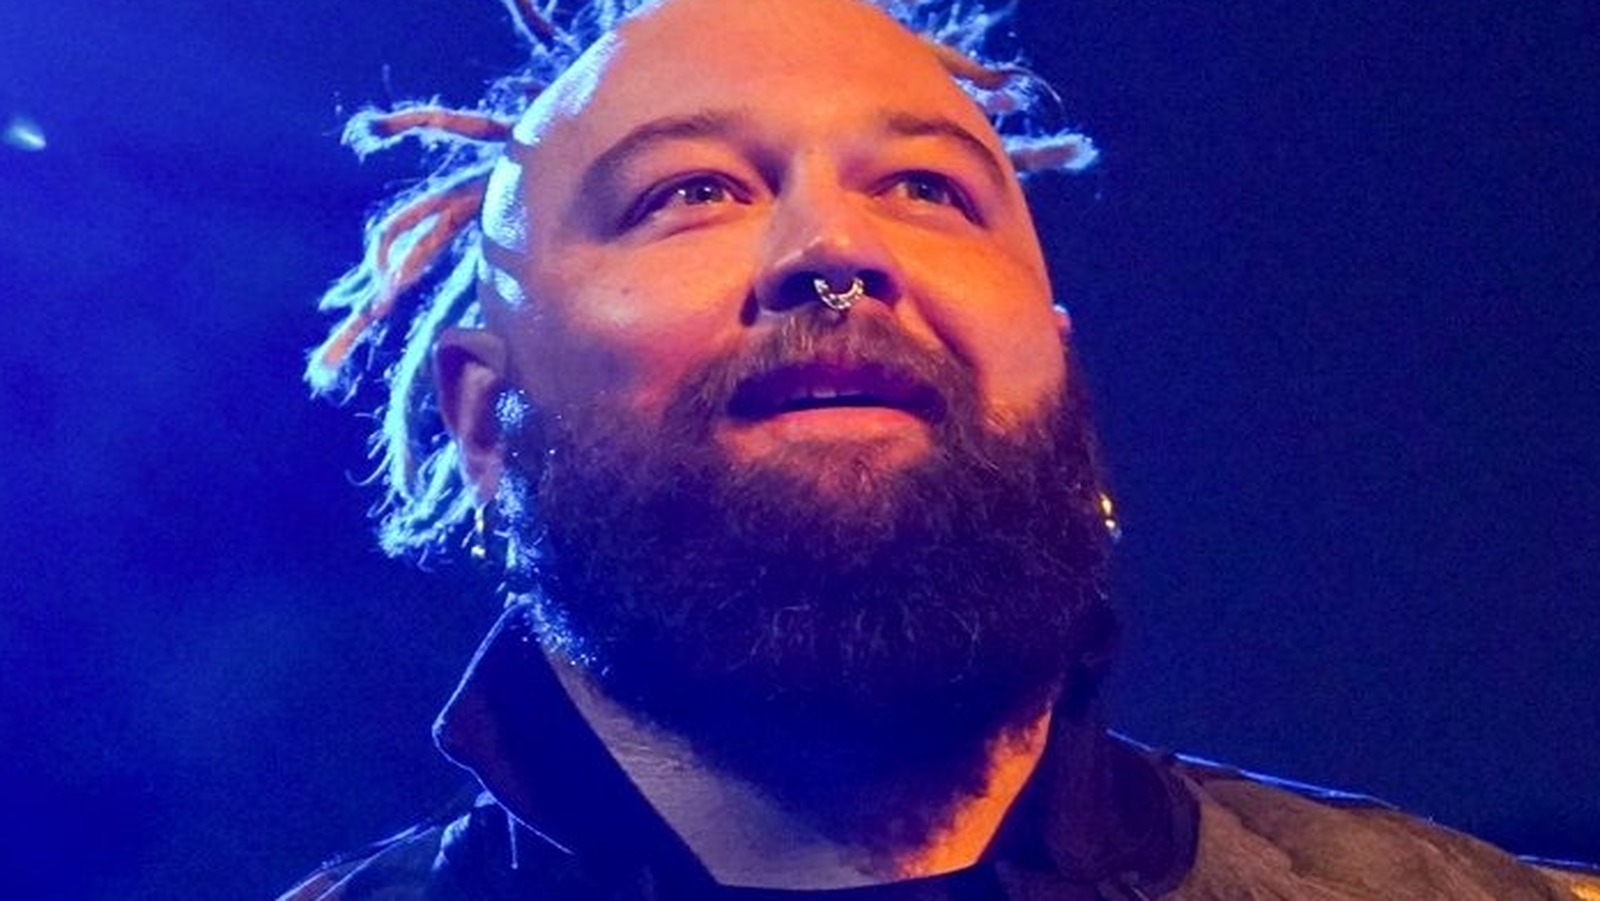 WWE Has A New Writer For Bray Wyatt, According To Road Dogg